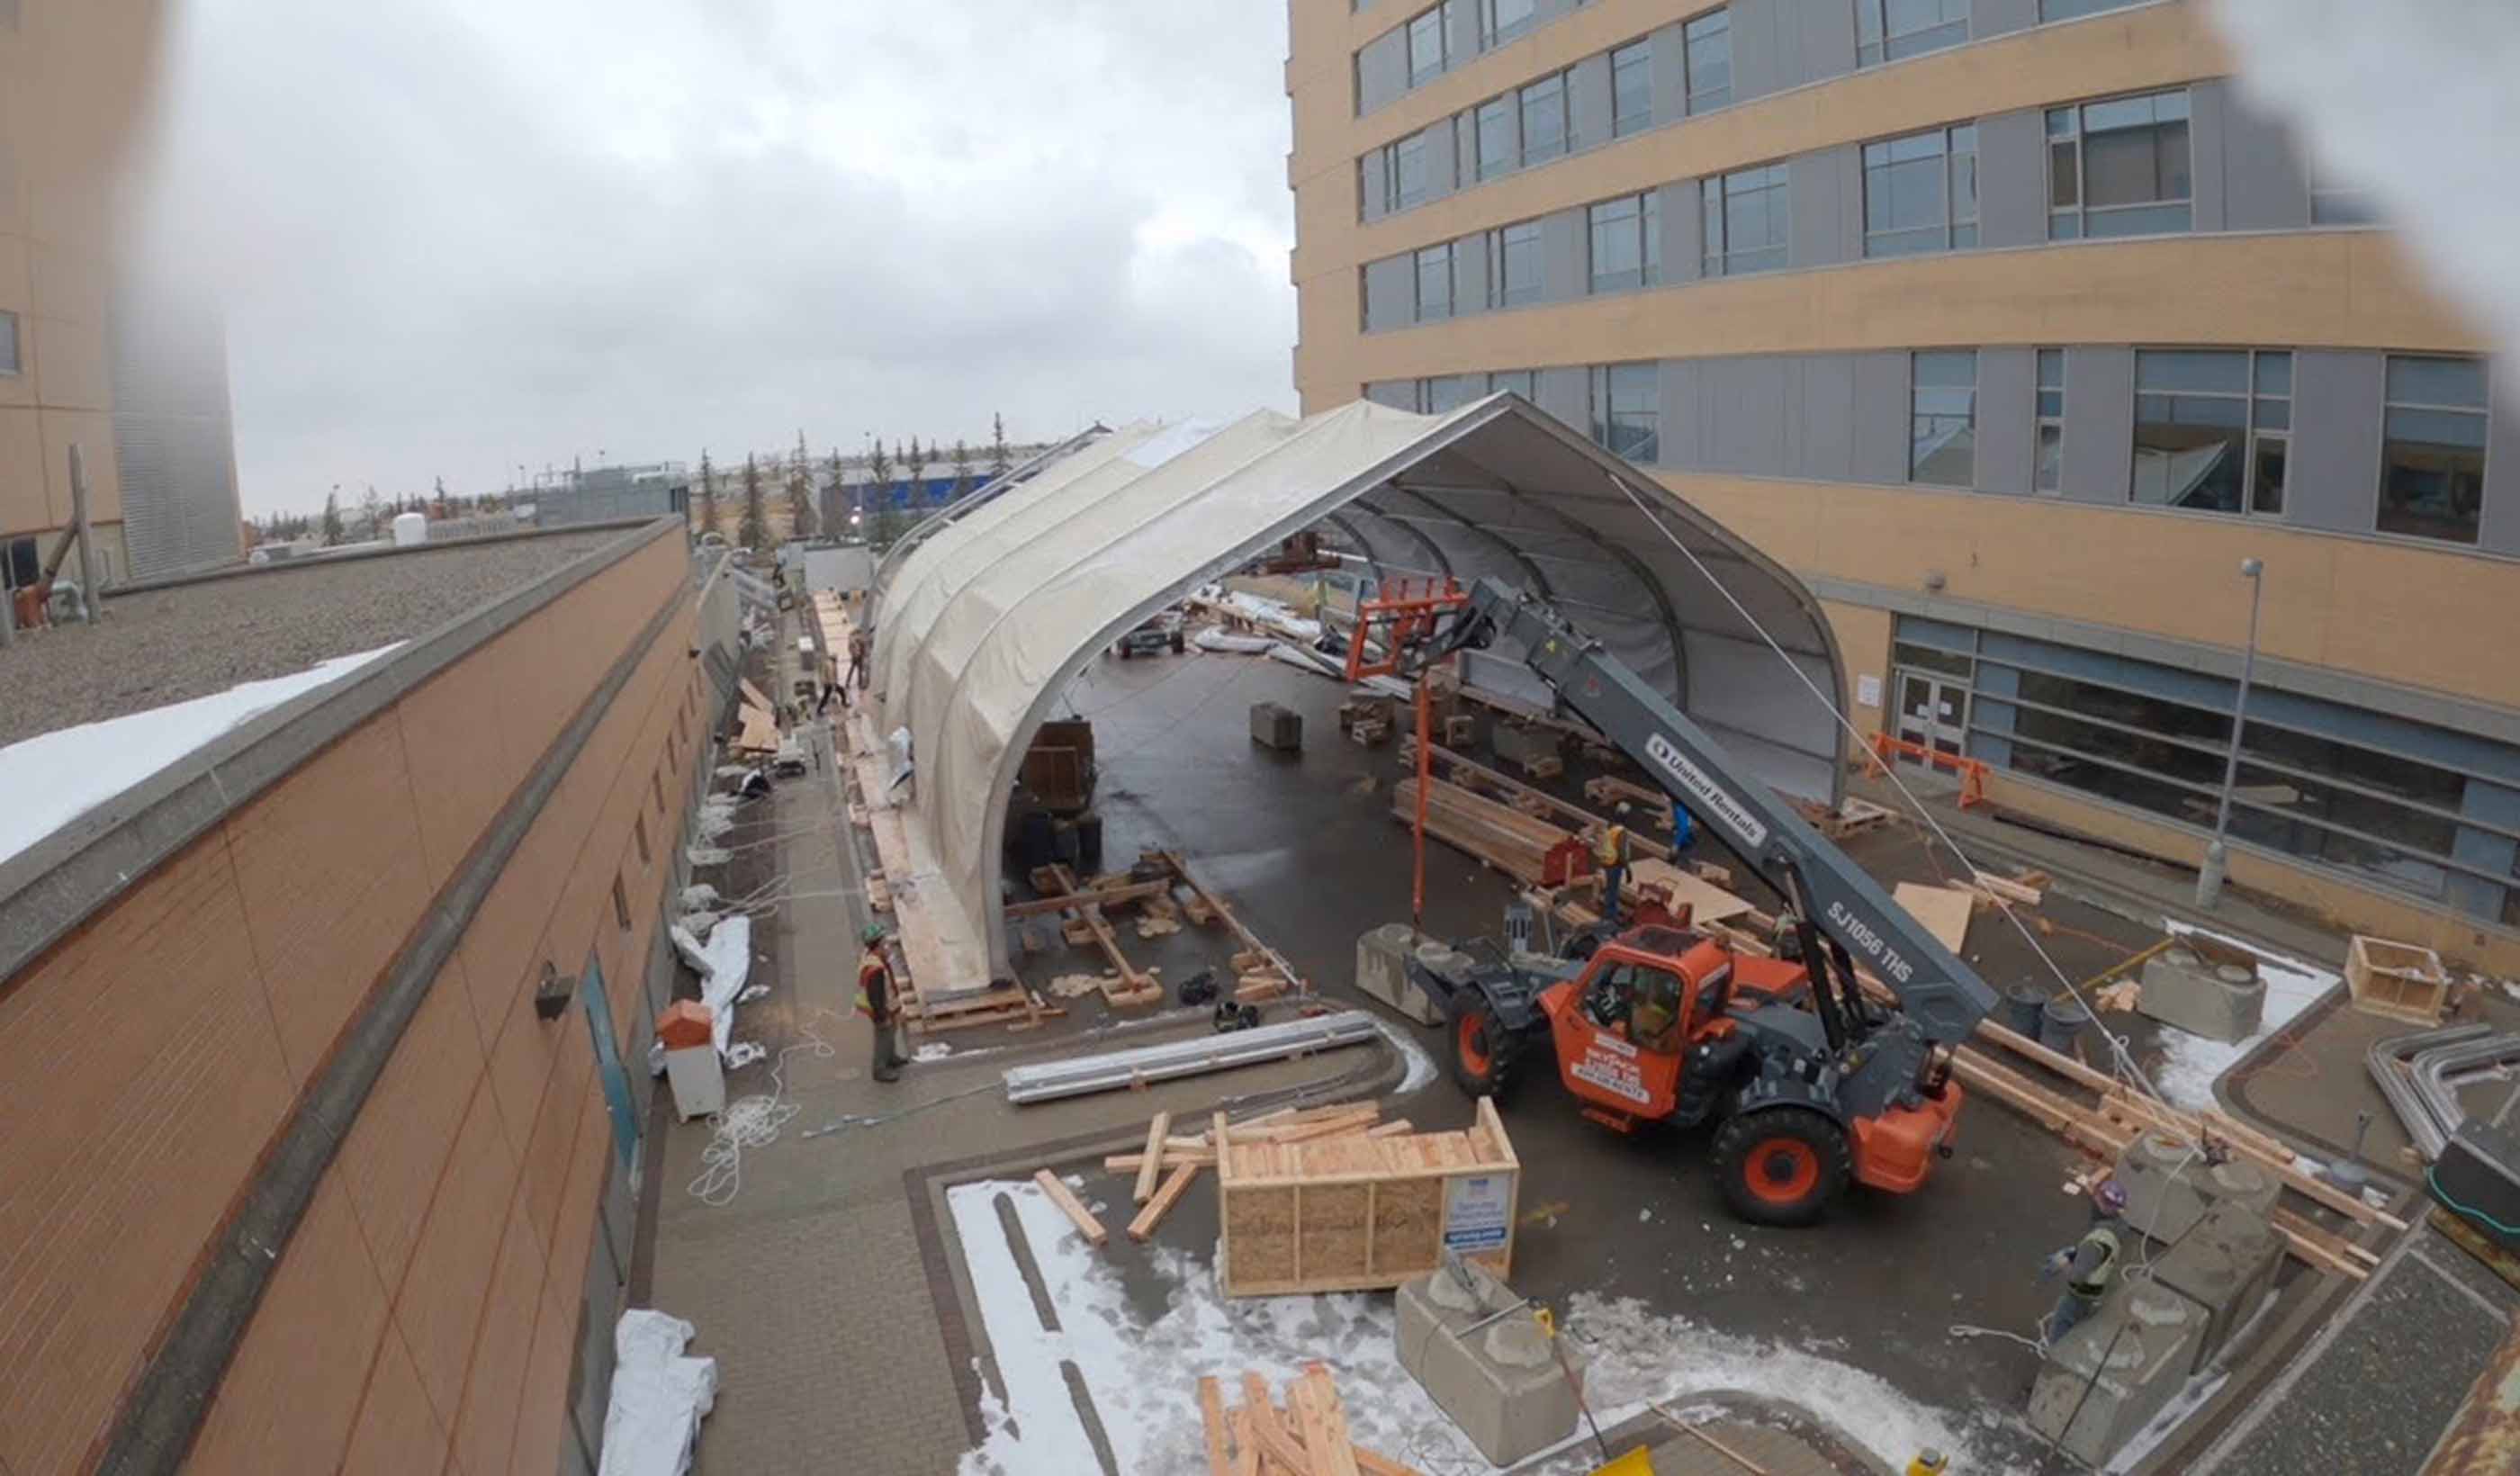 Albertans helping Albertans: Constructing Peter Lougheed Hospital’s temporary COVID-19 structure